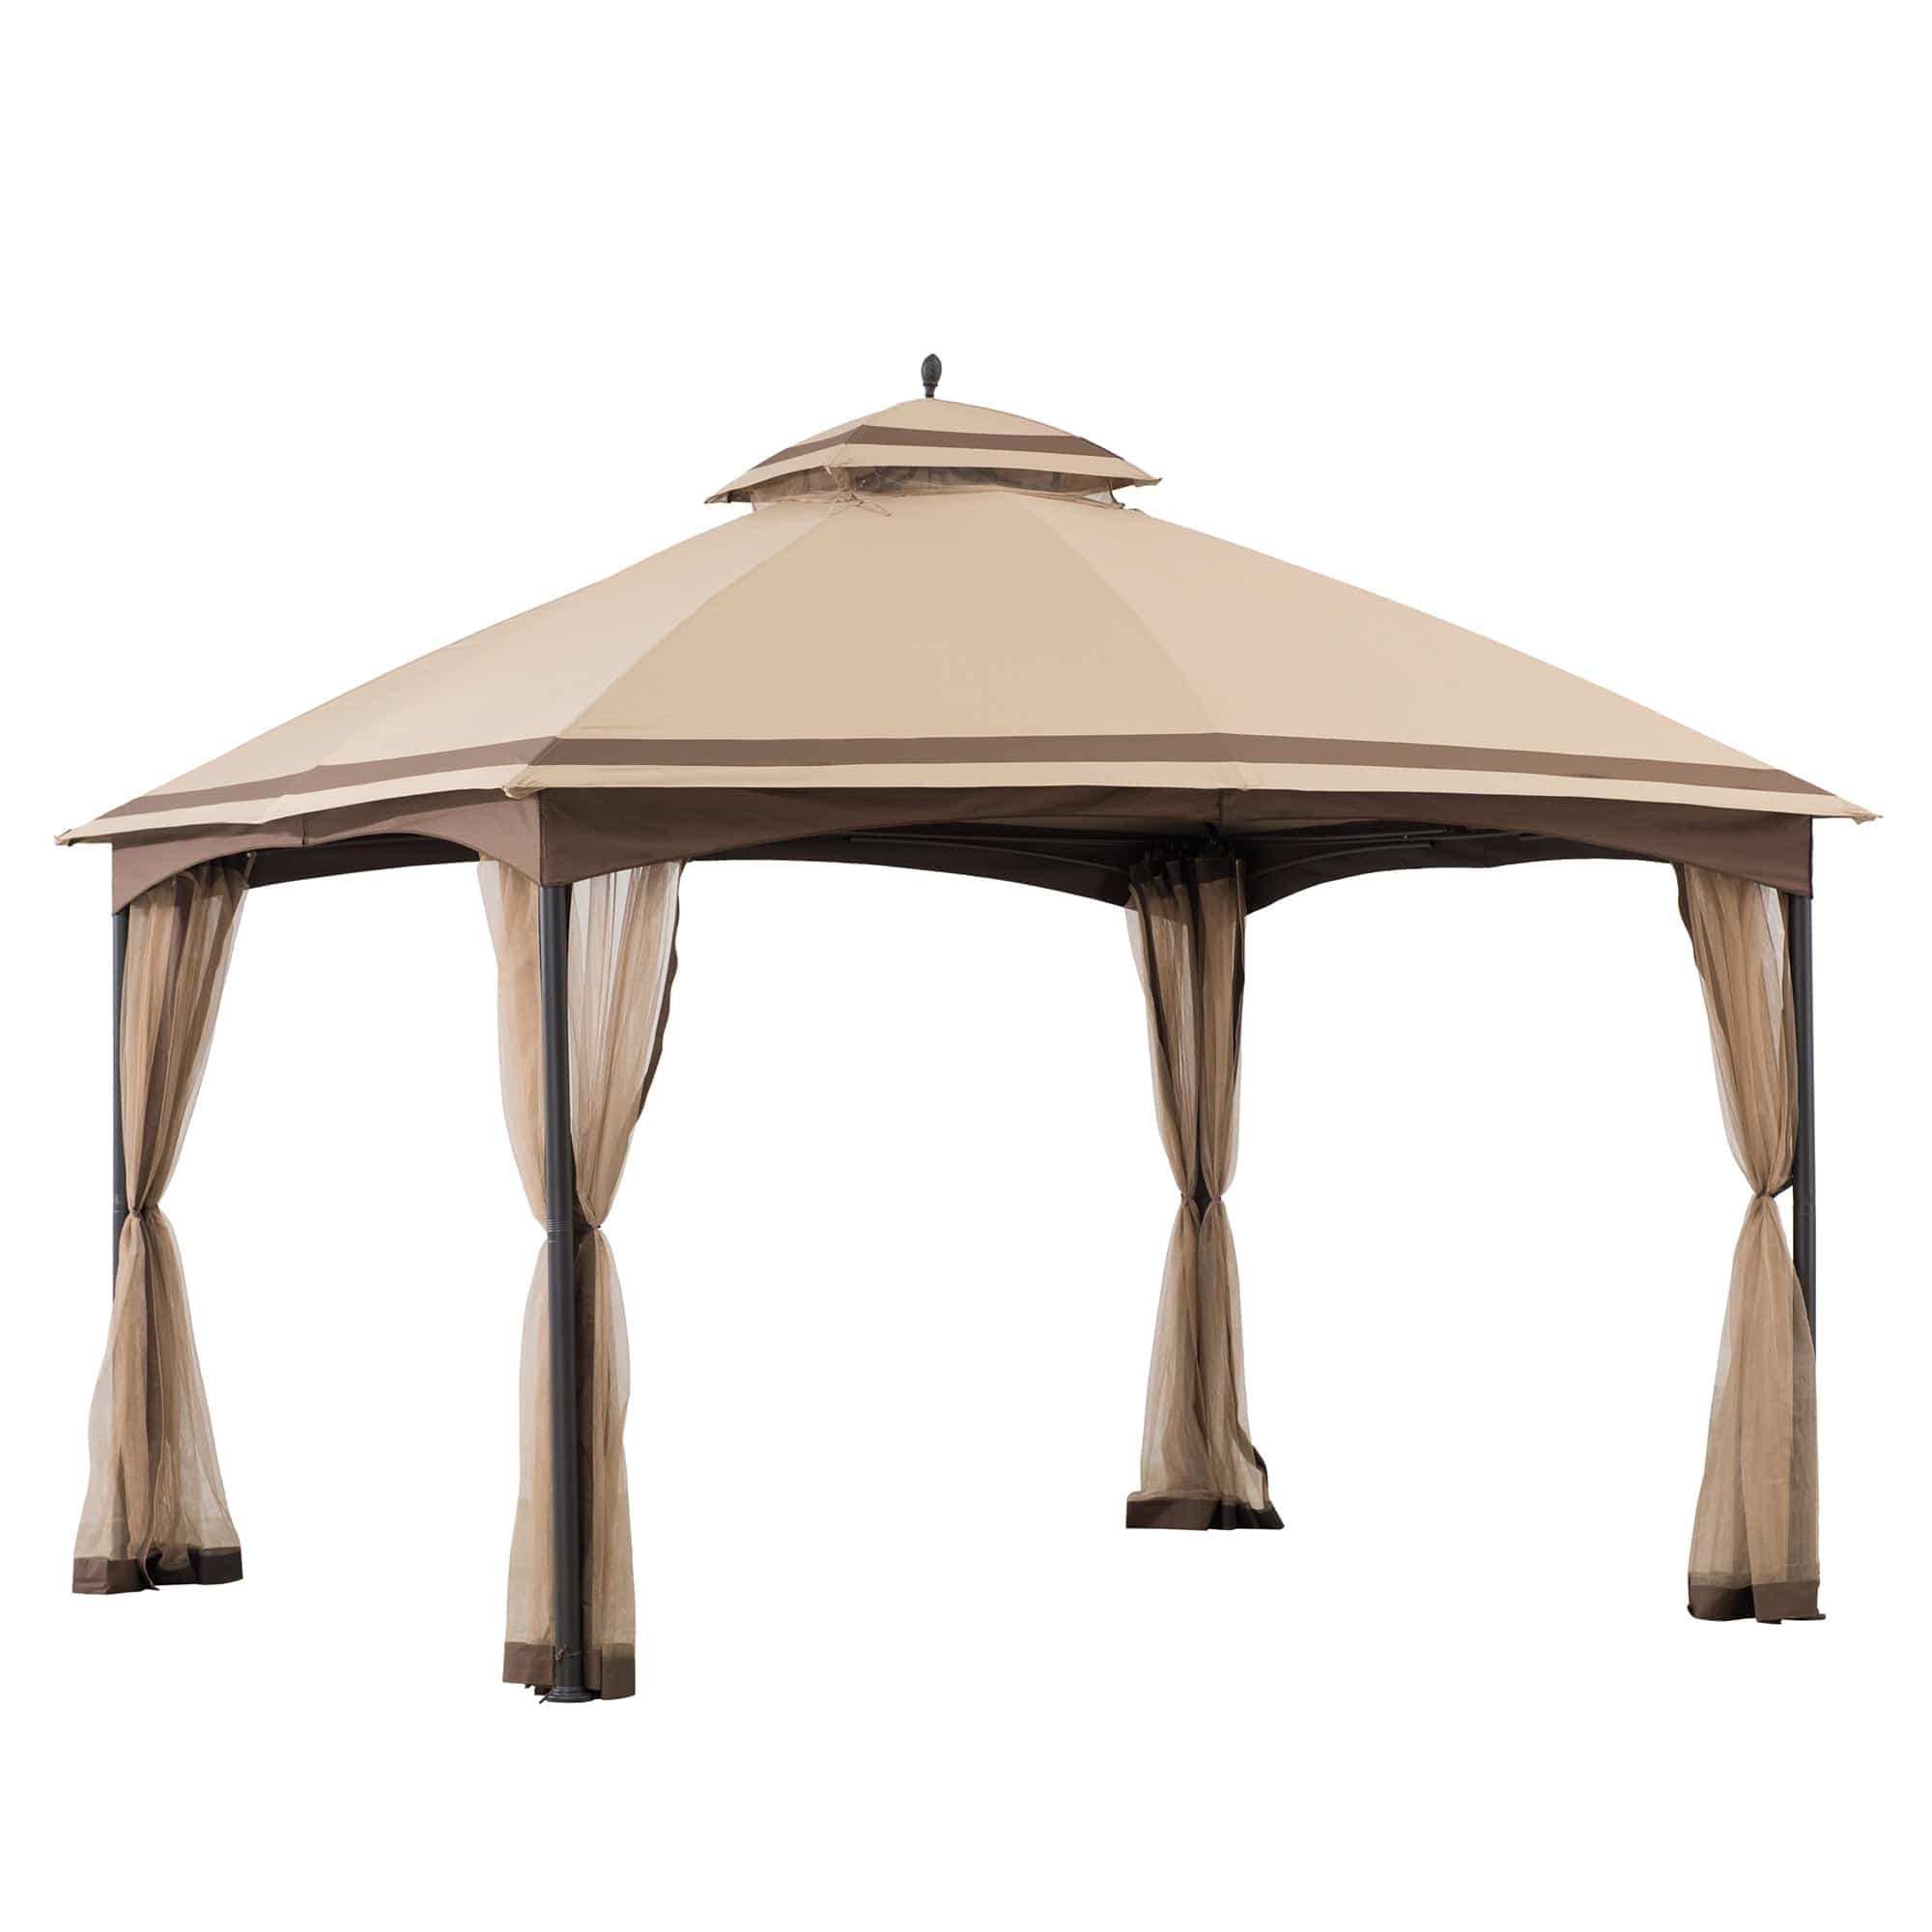 Sunjoy 10.5 ft. x 13 ft. 2-Tier Steel Soft Top Gazebo with Ceiling Hook and Netting